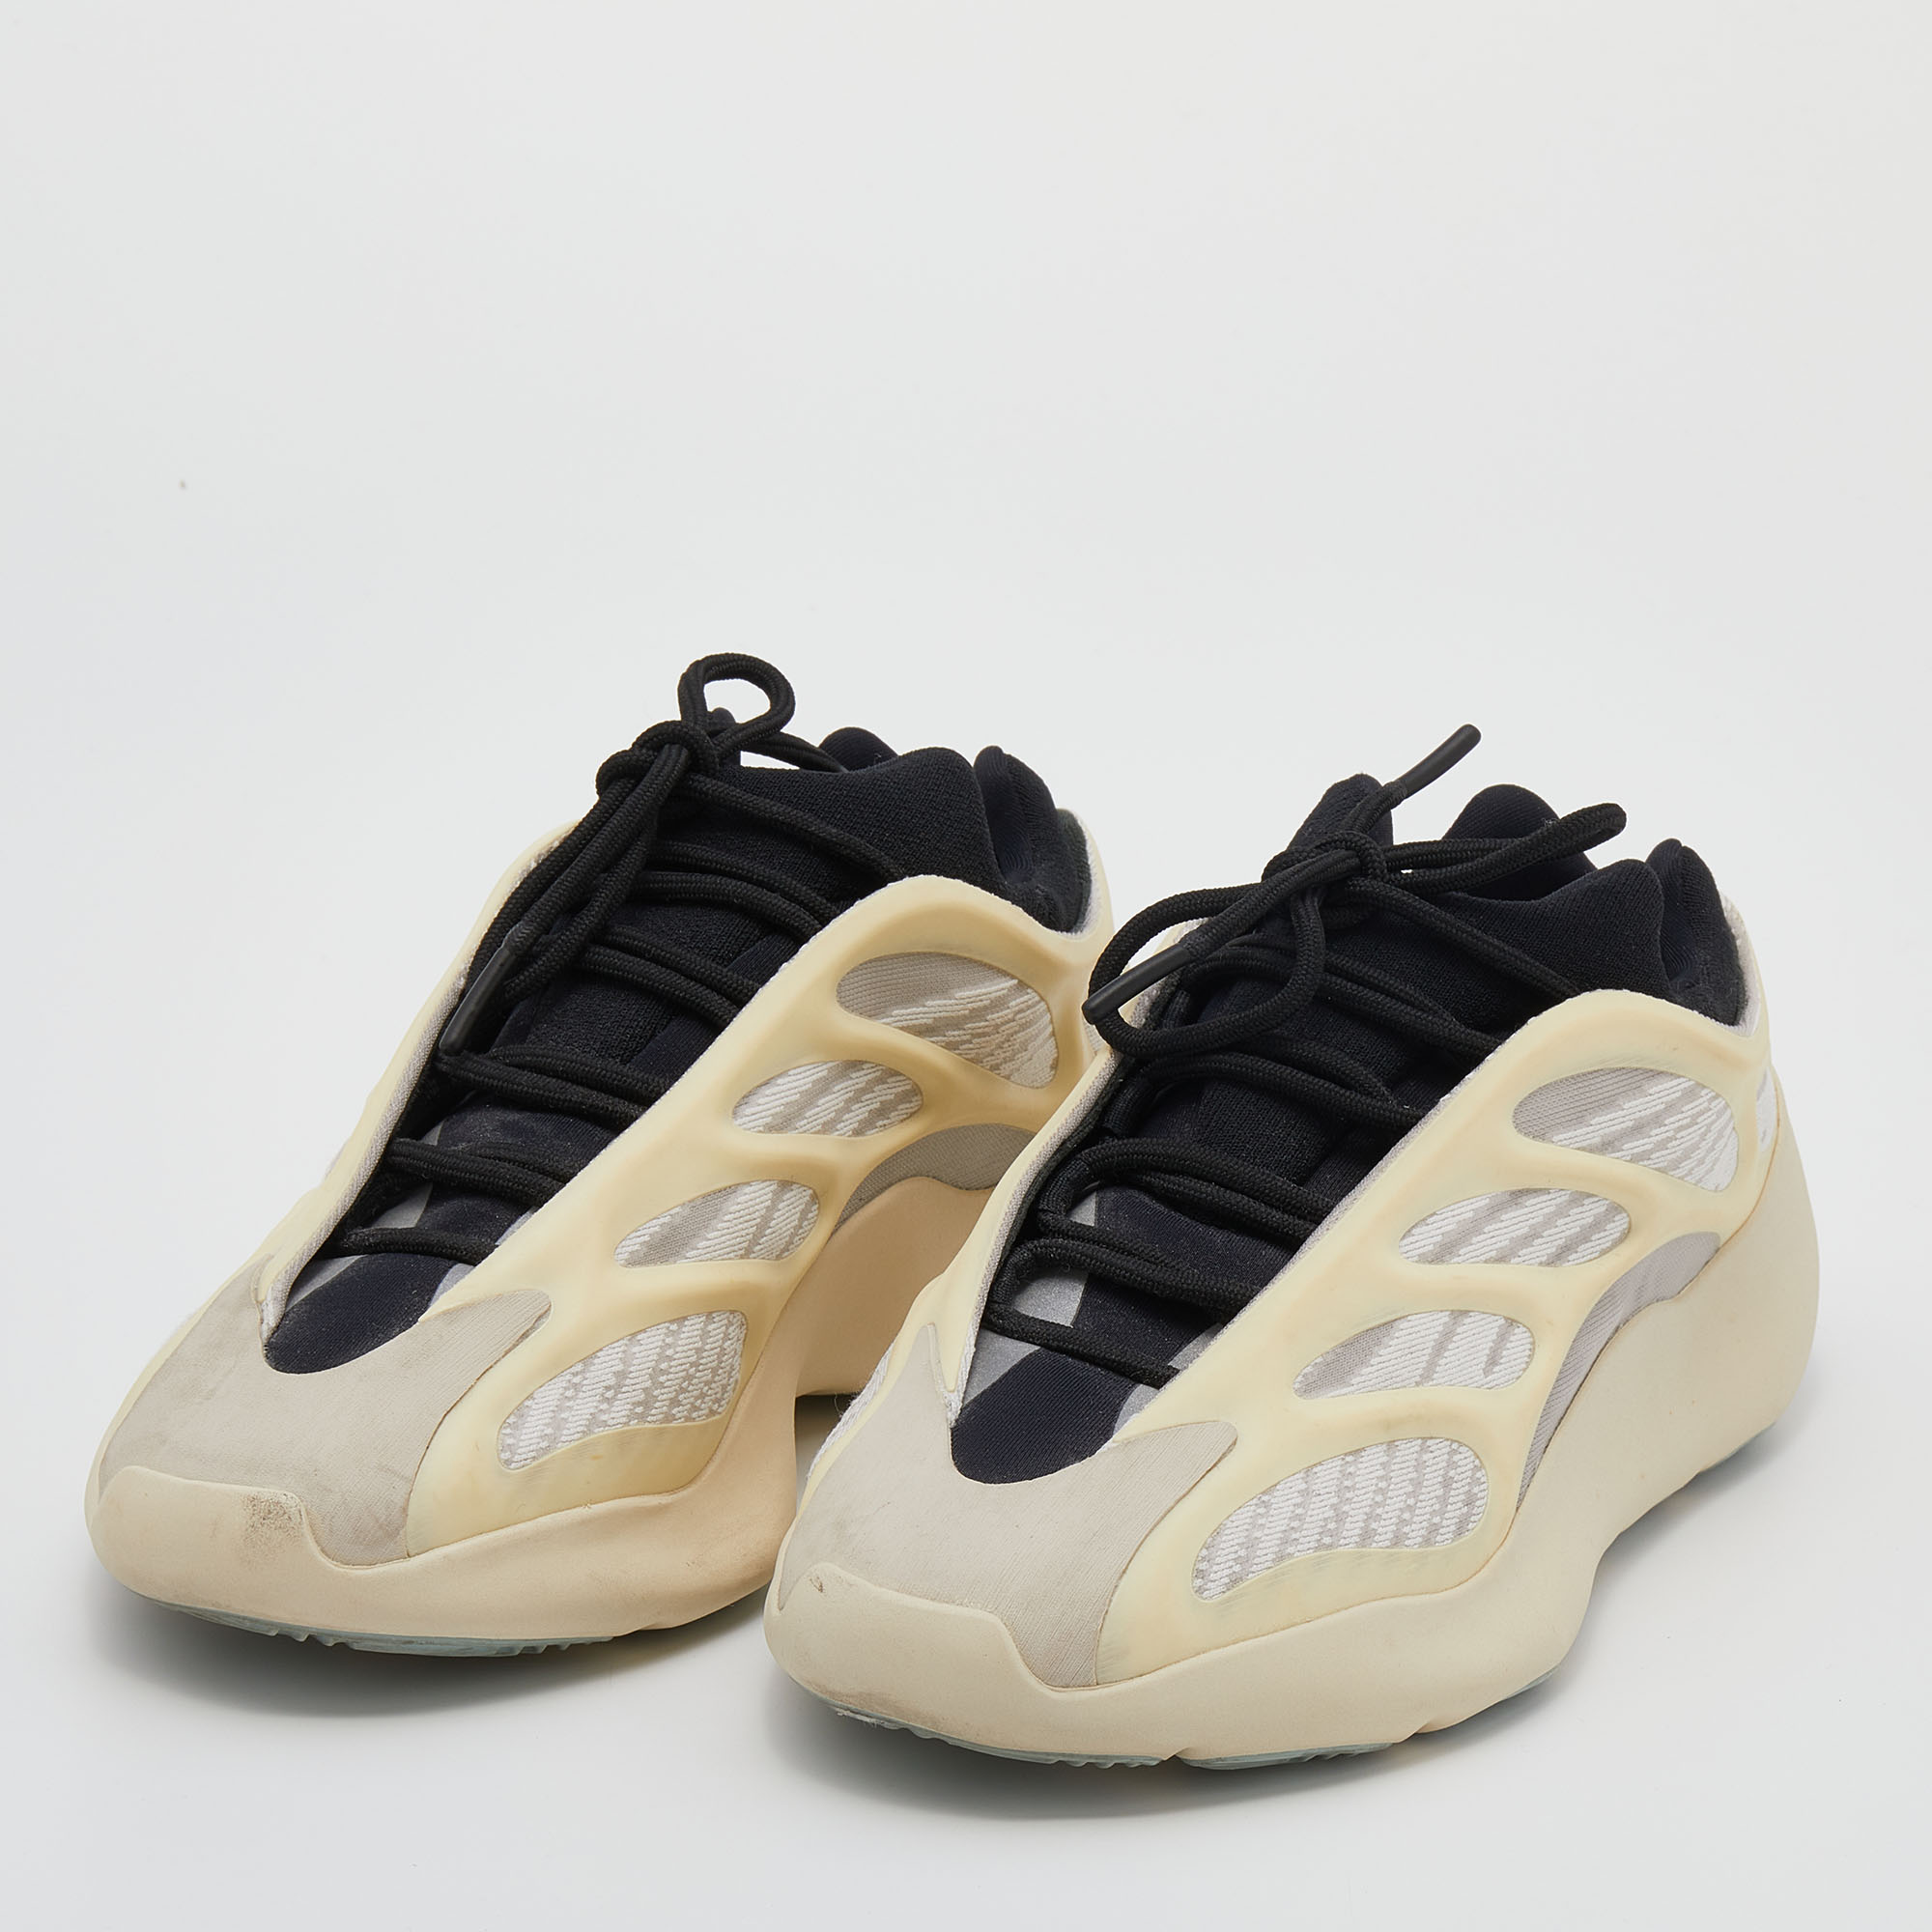 

Yeezy x Adidas Cream/Black Mesh And Rubber Yeezy 700 V3 Mono Safflower Sneakers Size